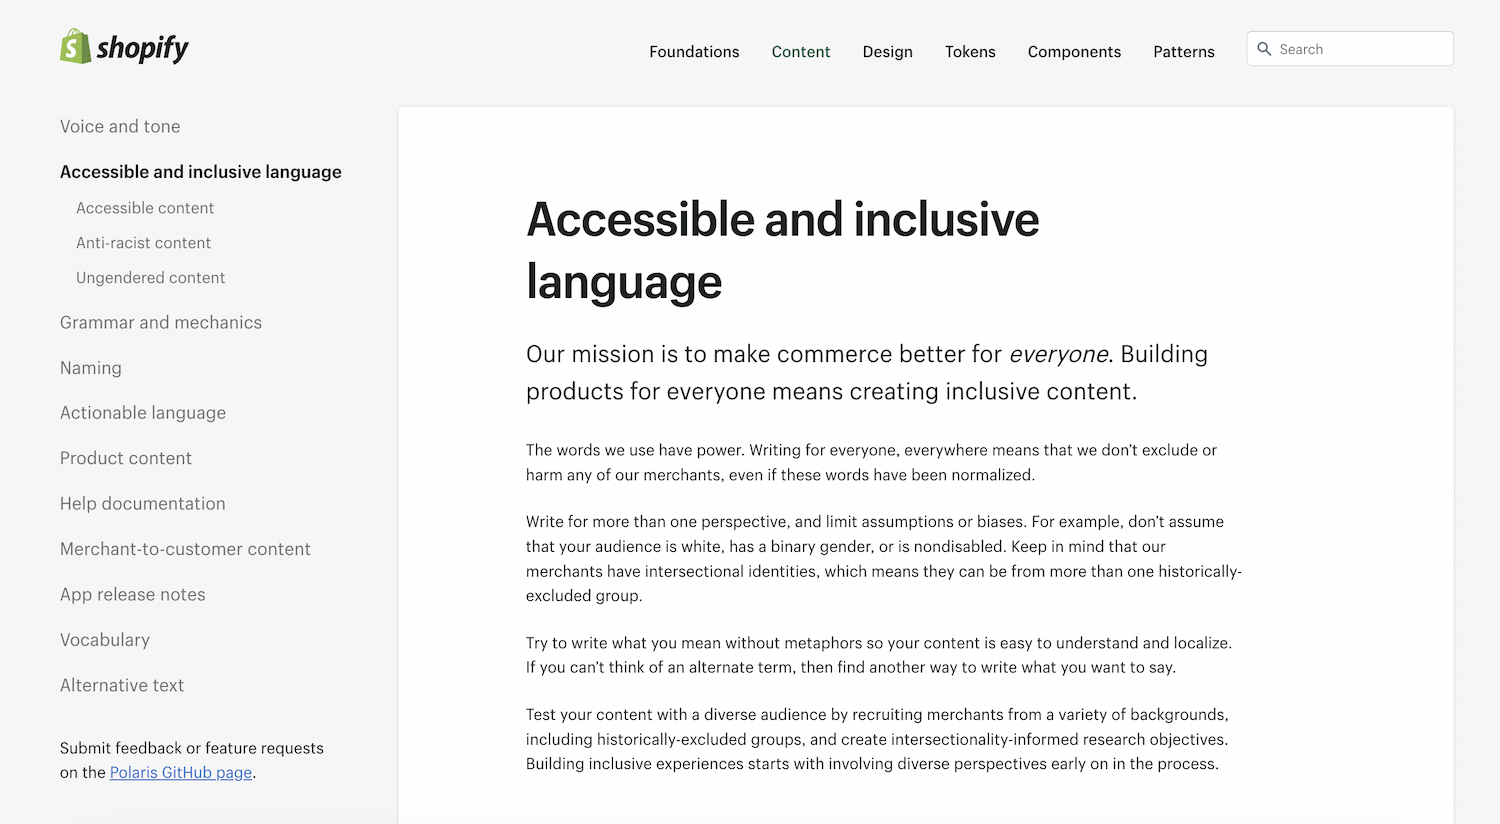 Screenshot of the ‘Accessible and inclusive language guide’ in Shopify’s design system, Polaris.